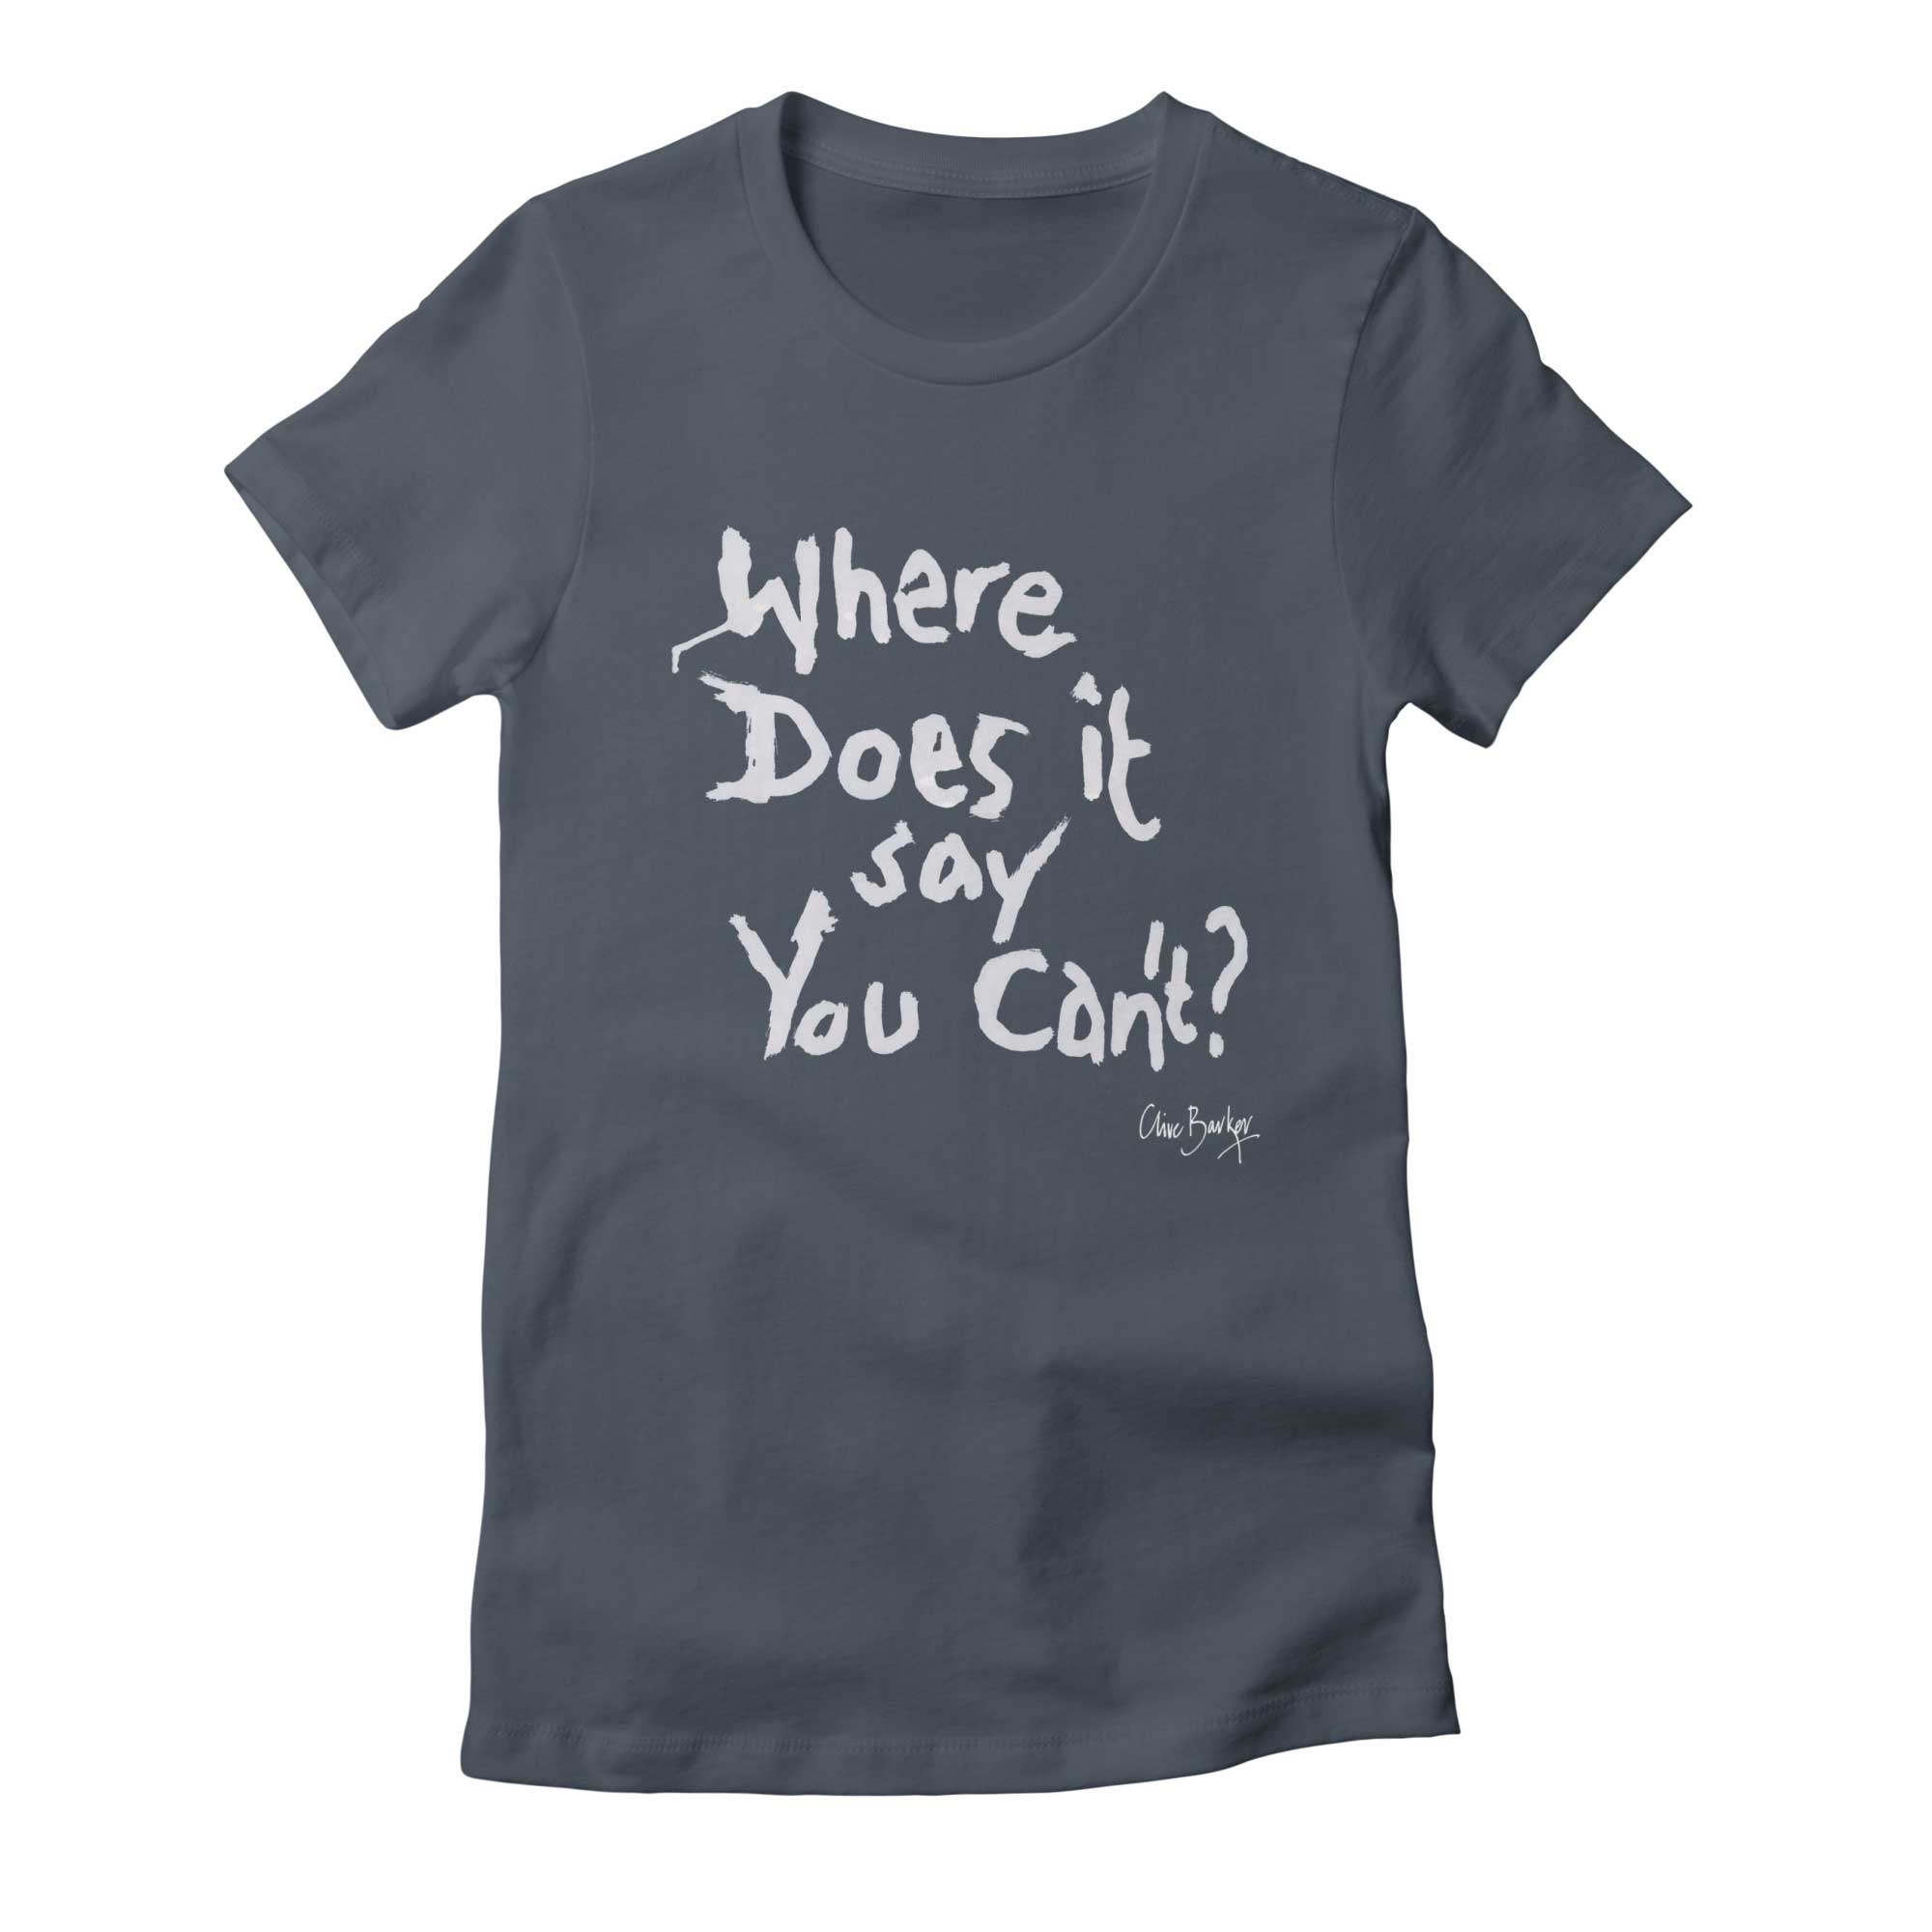 Clive Barker - Where Does It Say You Can't? tee